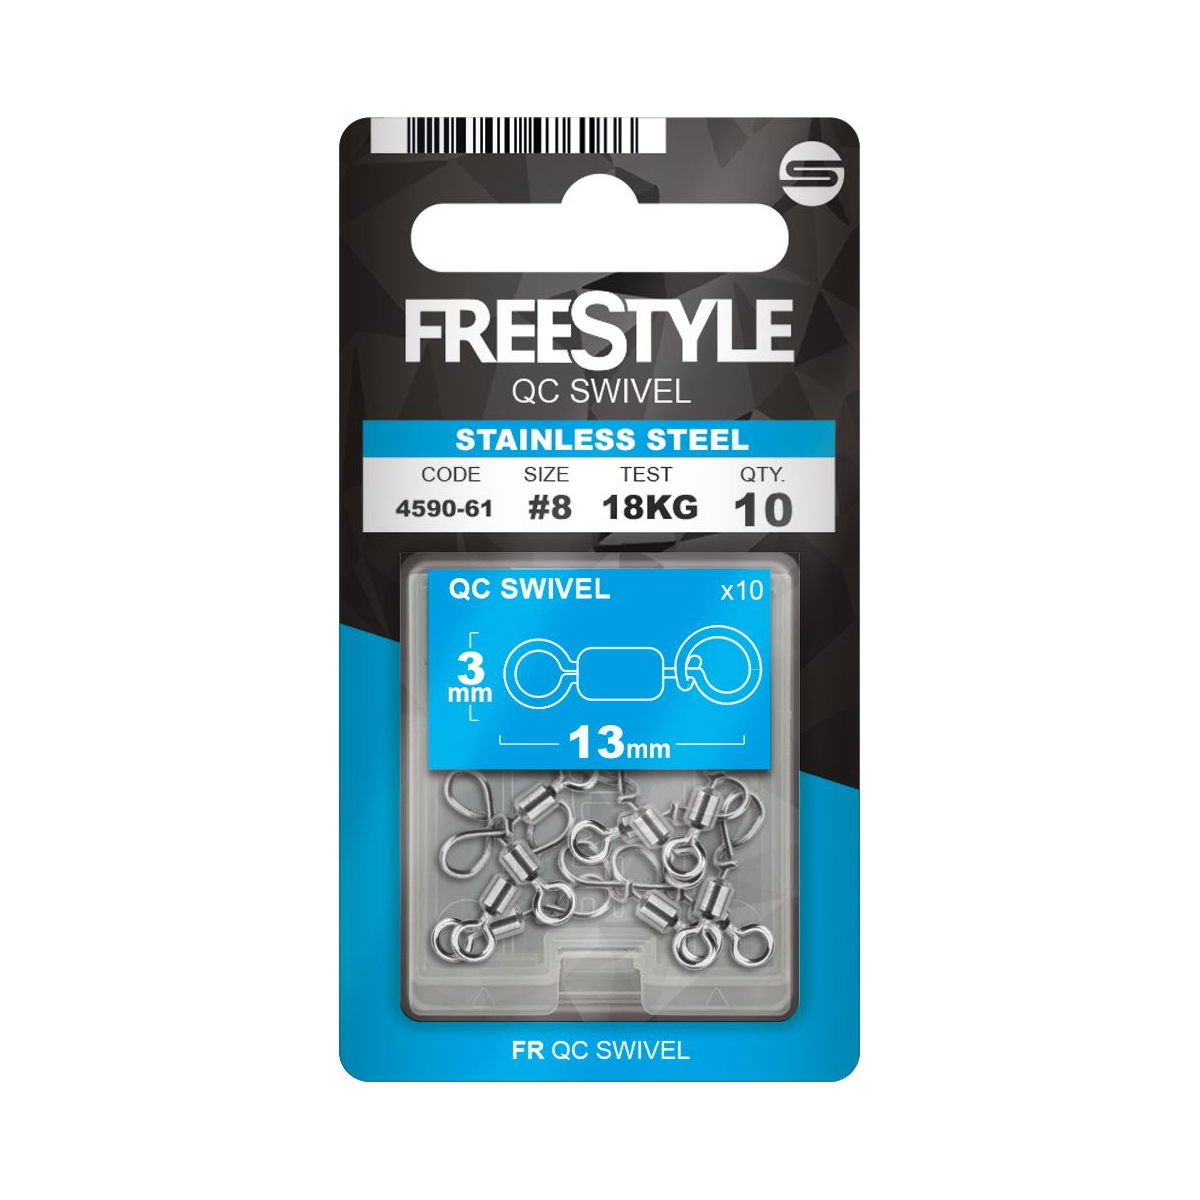 Spro FreeStyle Reload QC Swivel